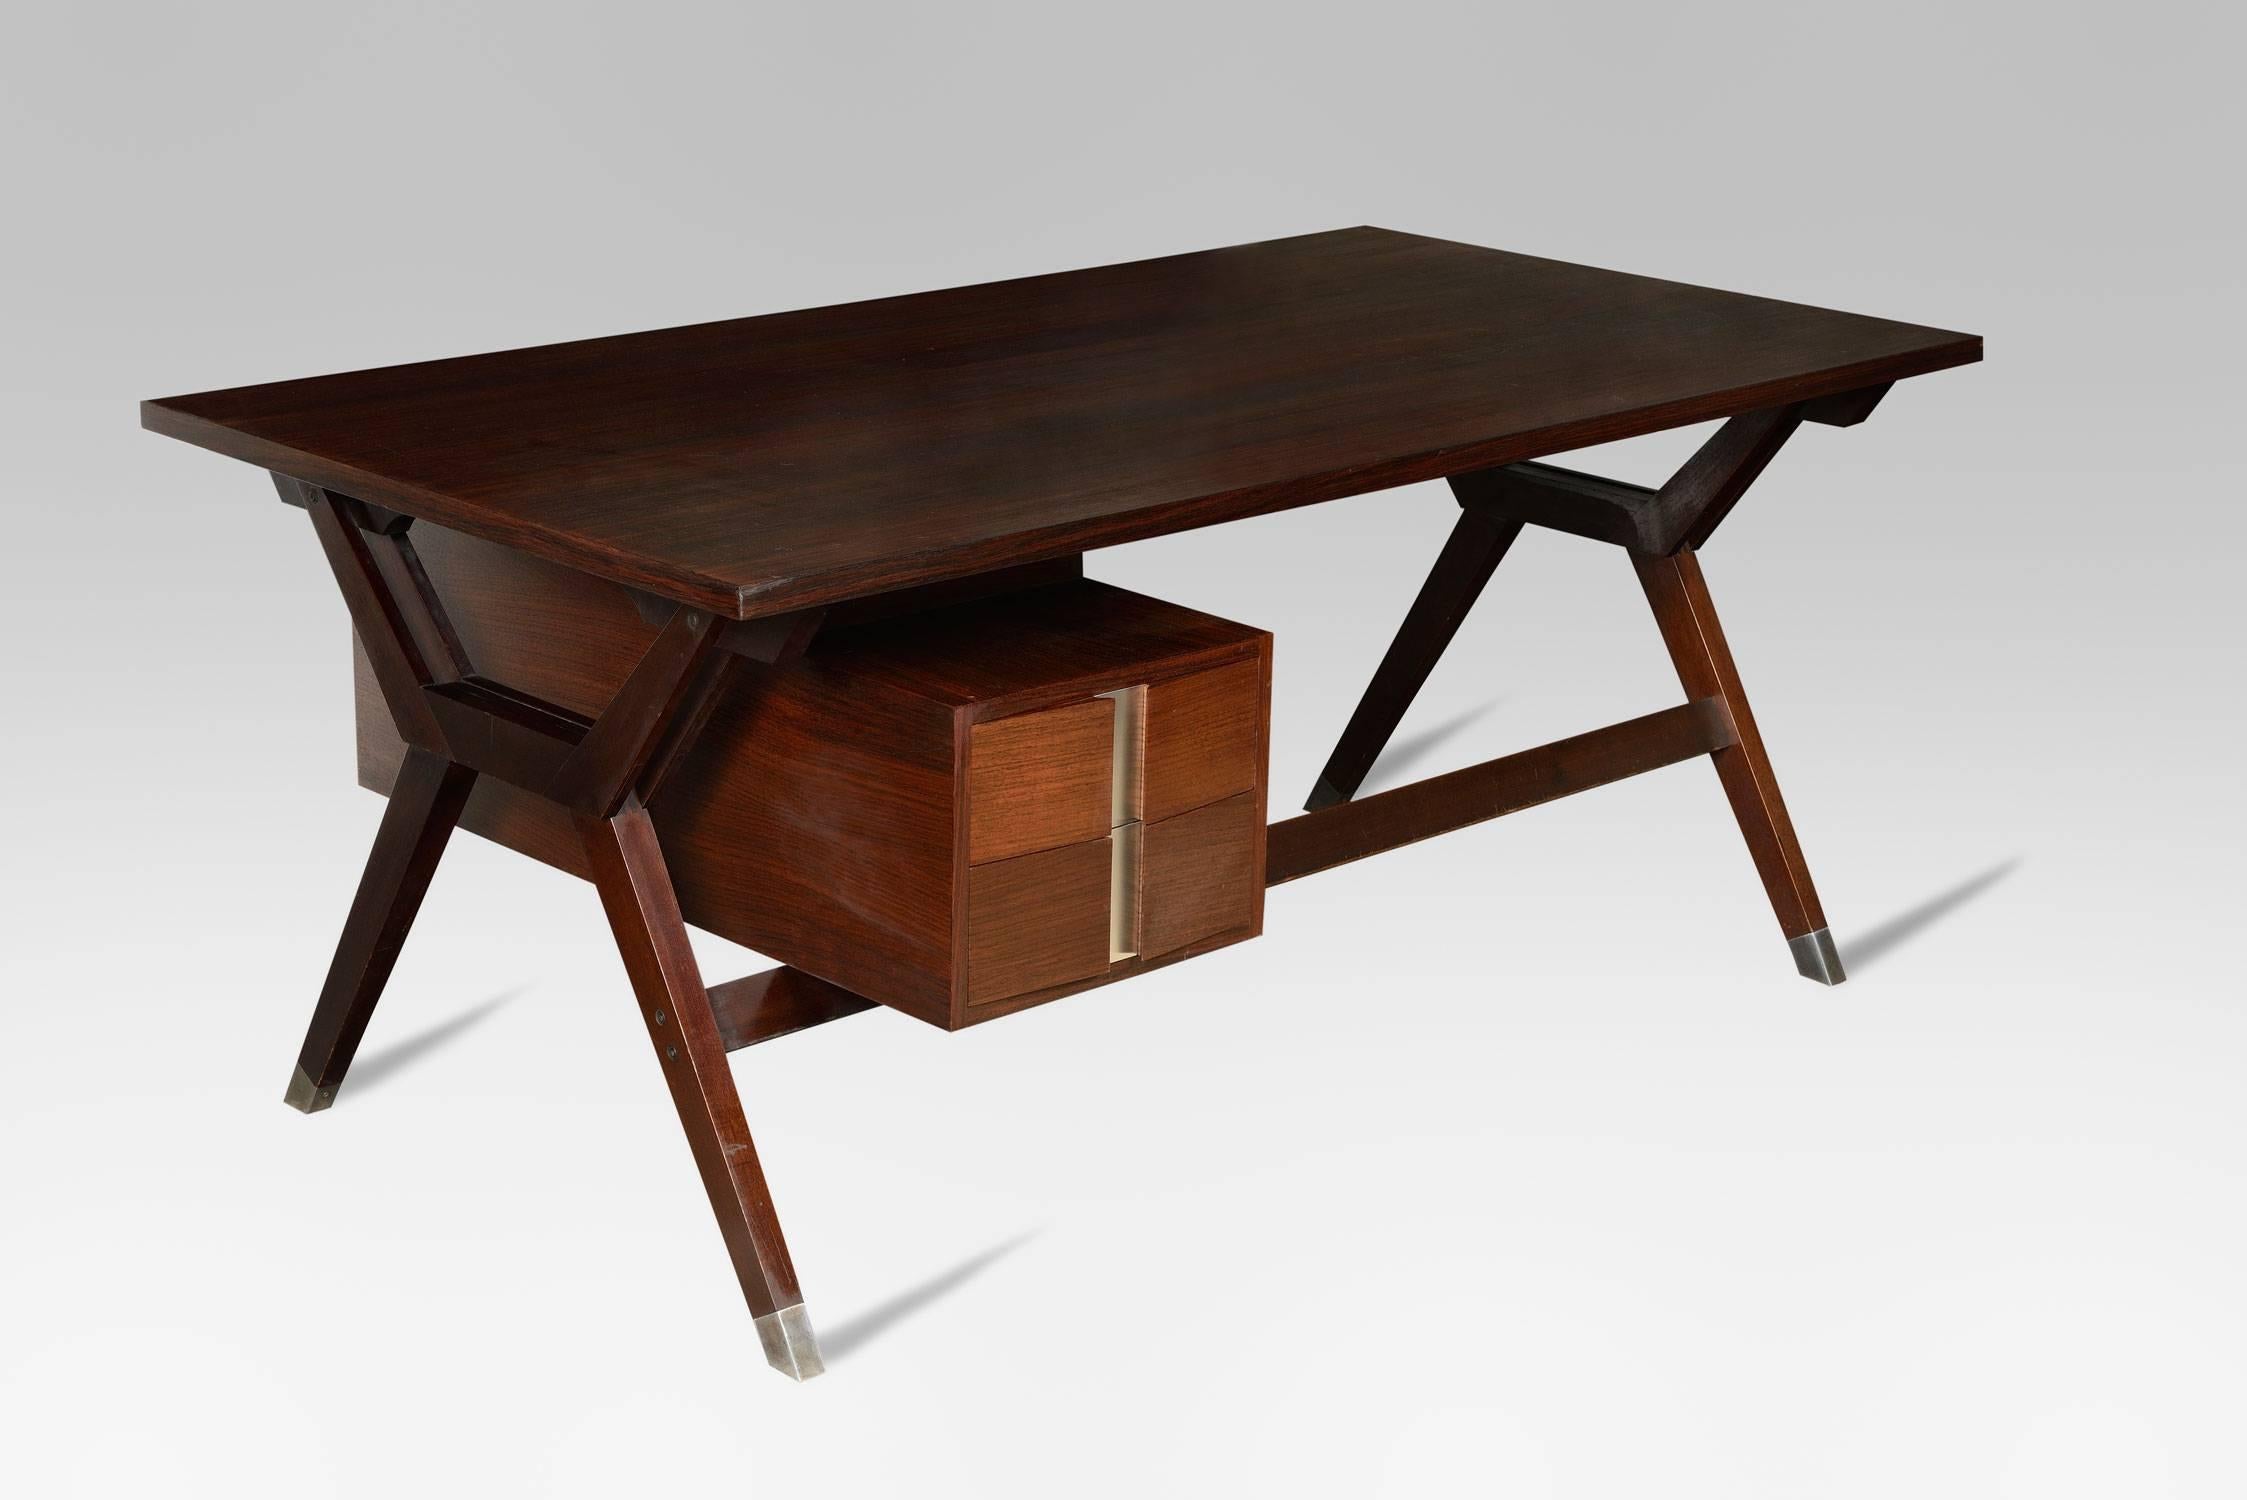 Large flat desk by Ico Parisi (1916-1996)
1958, Italy
For MIM Roma (label)
Rosewood
Flat desk on X-base with chrome legs
Two-sided drawer storage unit
Shelf
Measures: 74 x 180 x 90 cm
In good conditions.